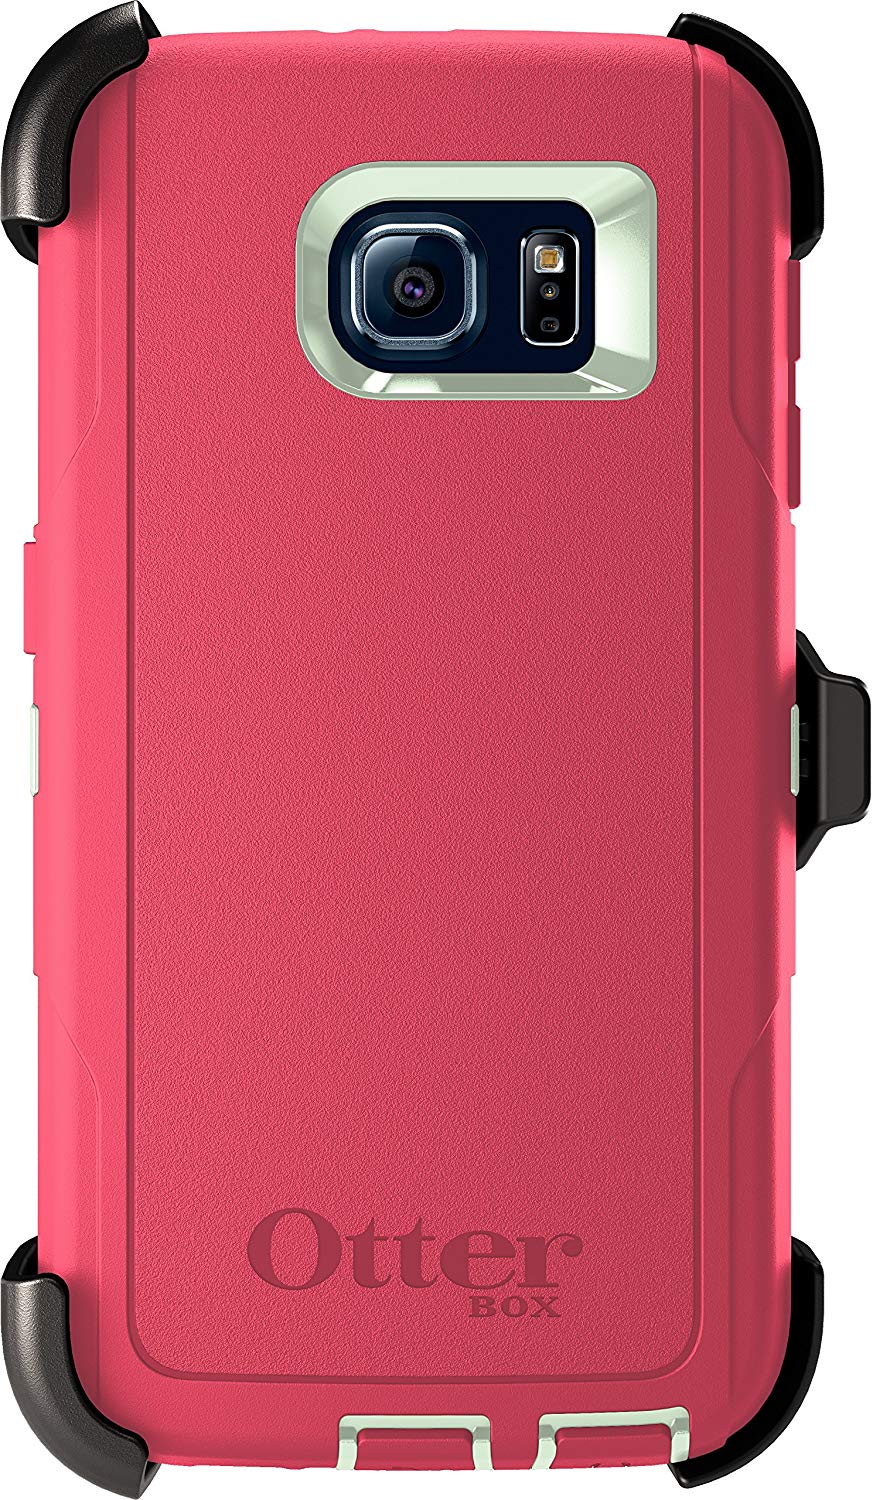 OtterBox DEFENDER SERIES Case for Samsung Galaxy S6 - Melon Pop (Certified Refurbished)